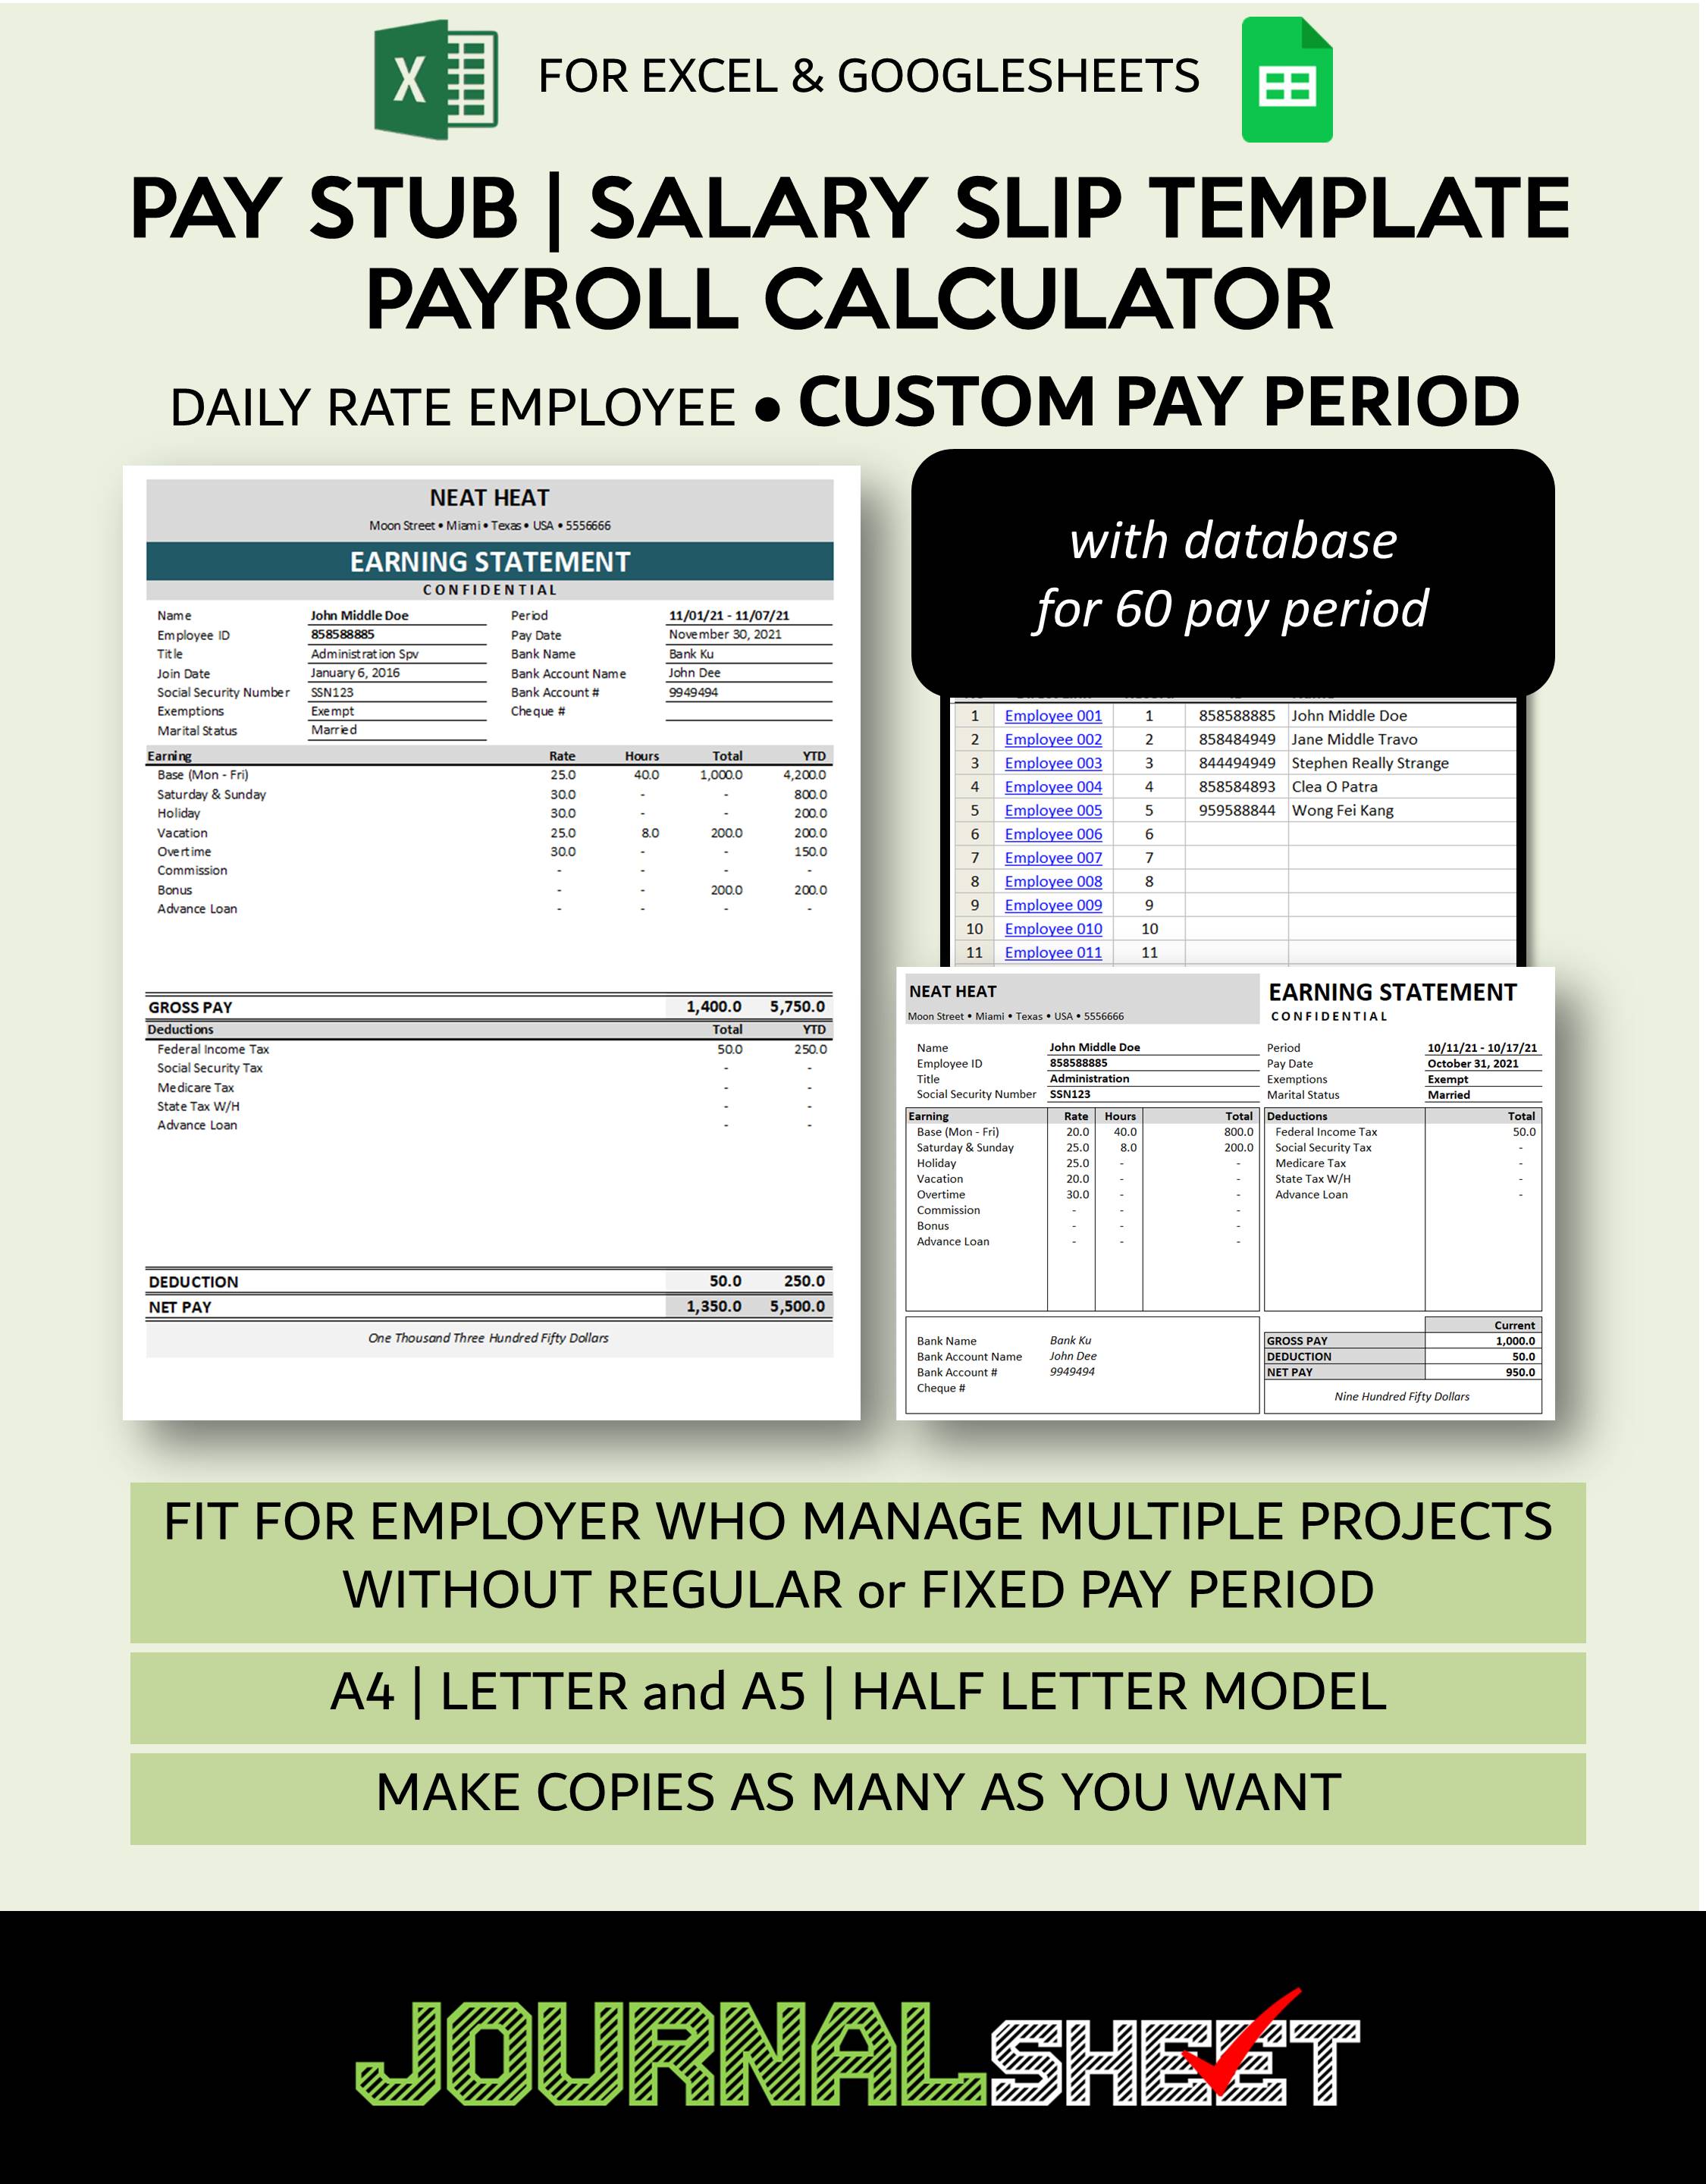 Pay Stub - Salary Slip Template - Daily Rate - Custom Payment Period